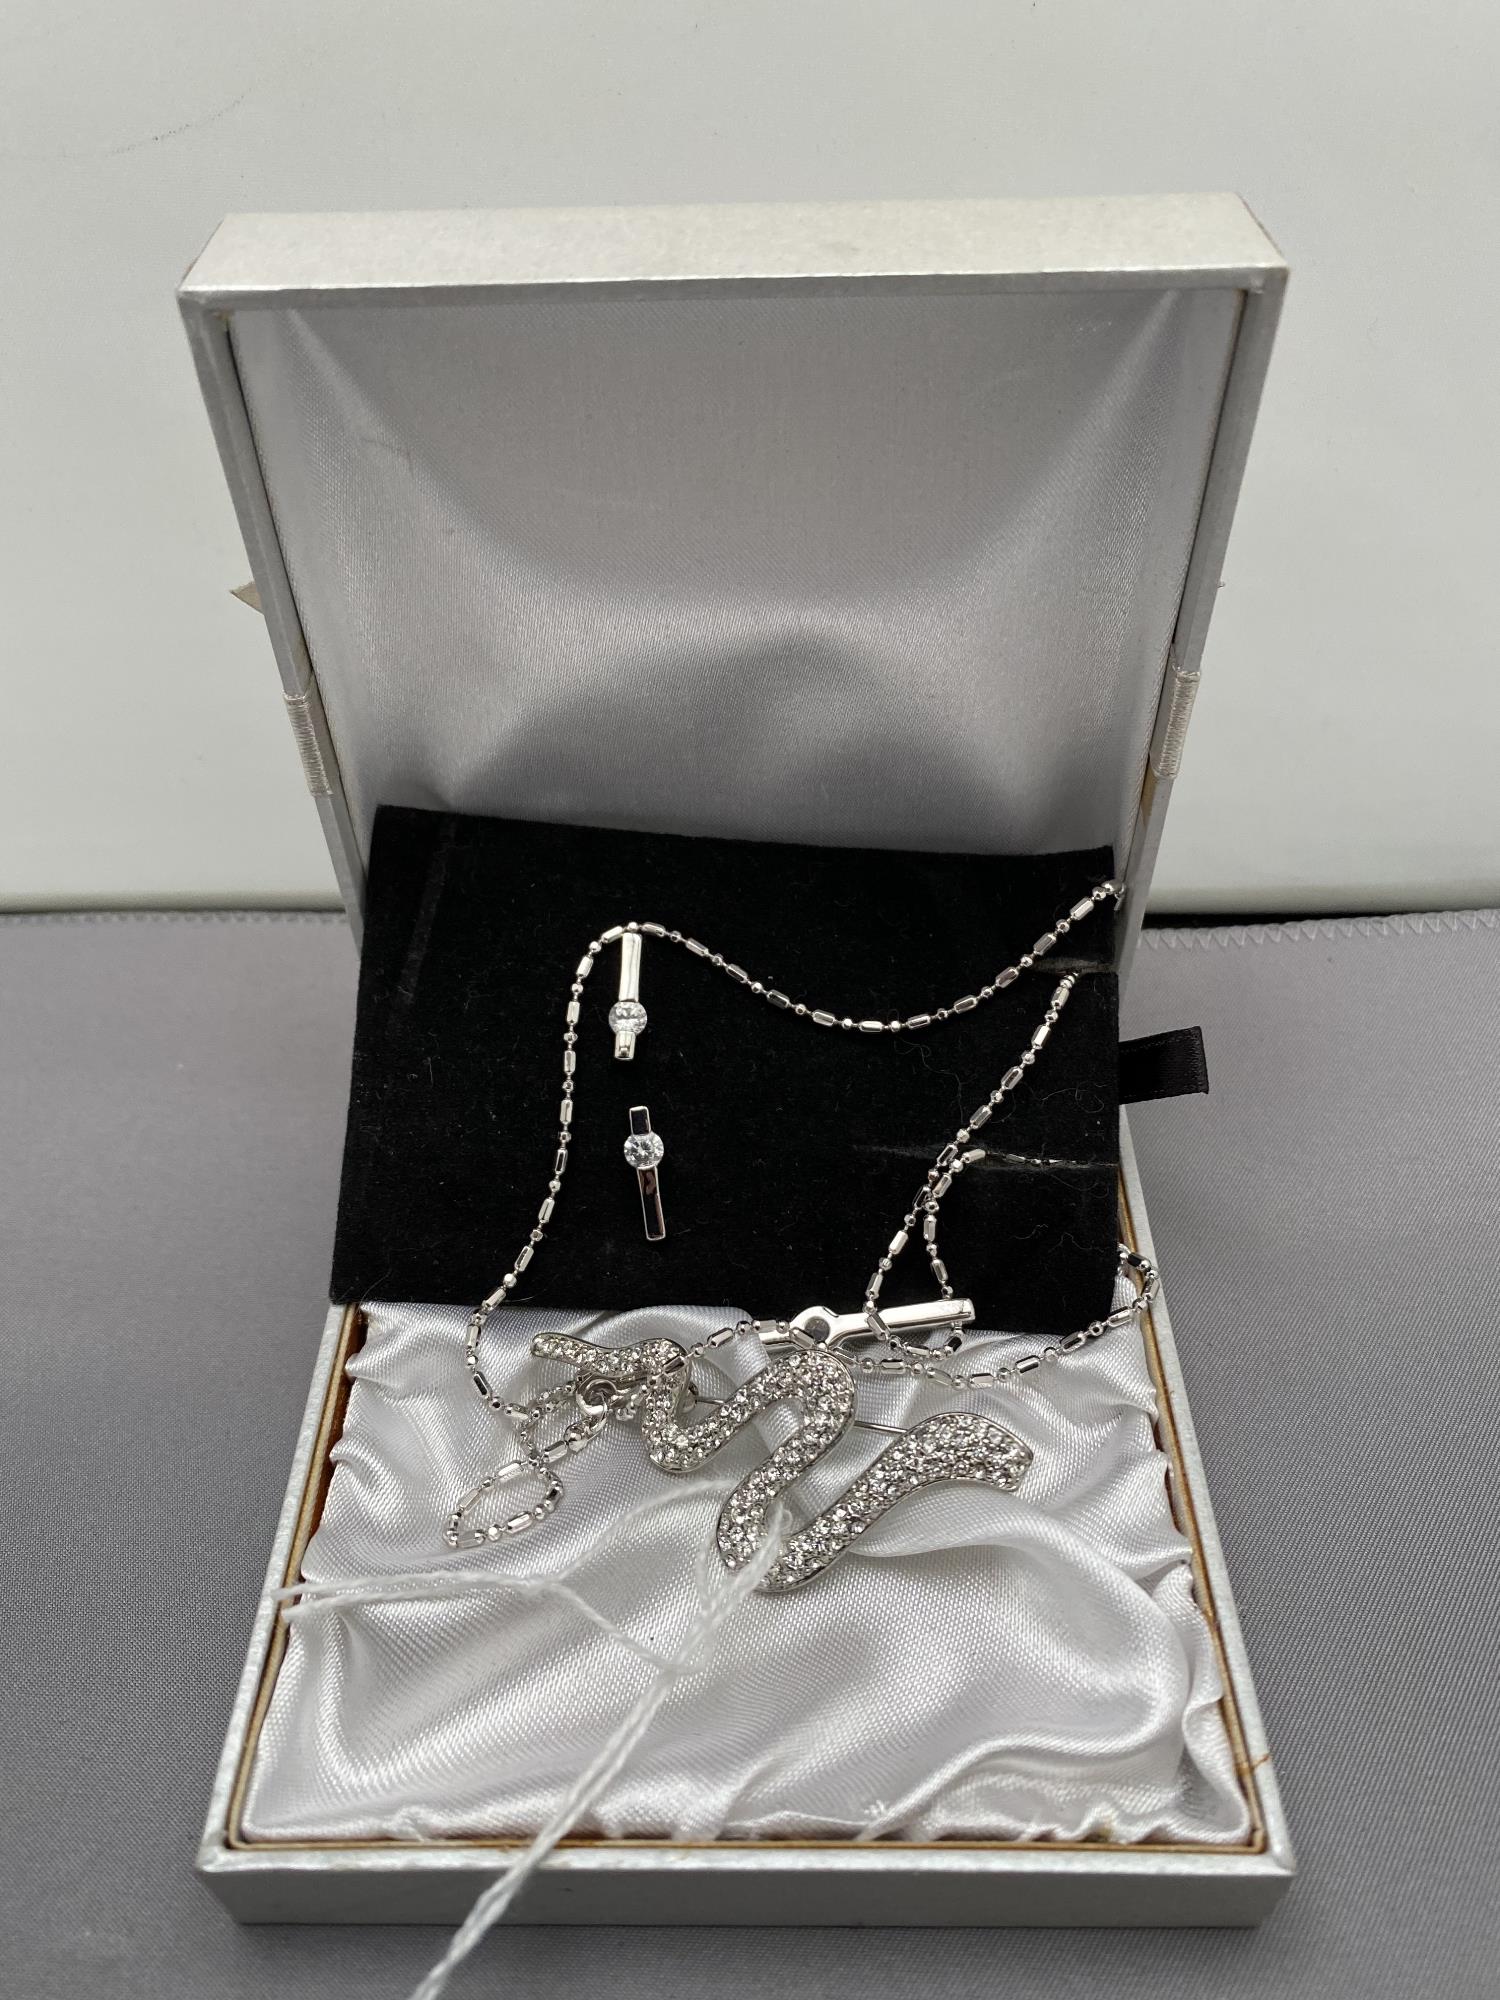 A pendant and earrings set in box together with a snake brooch